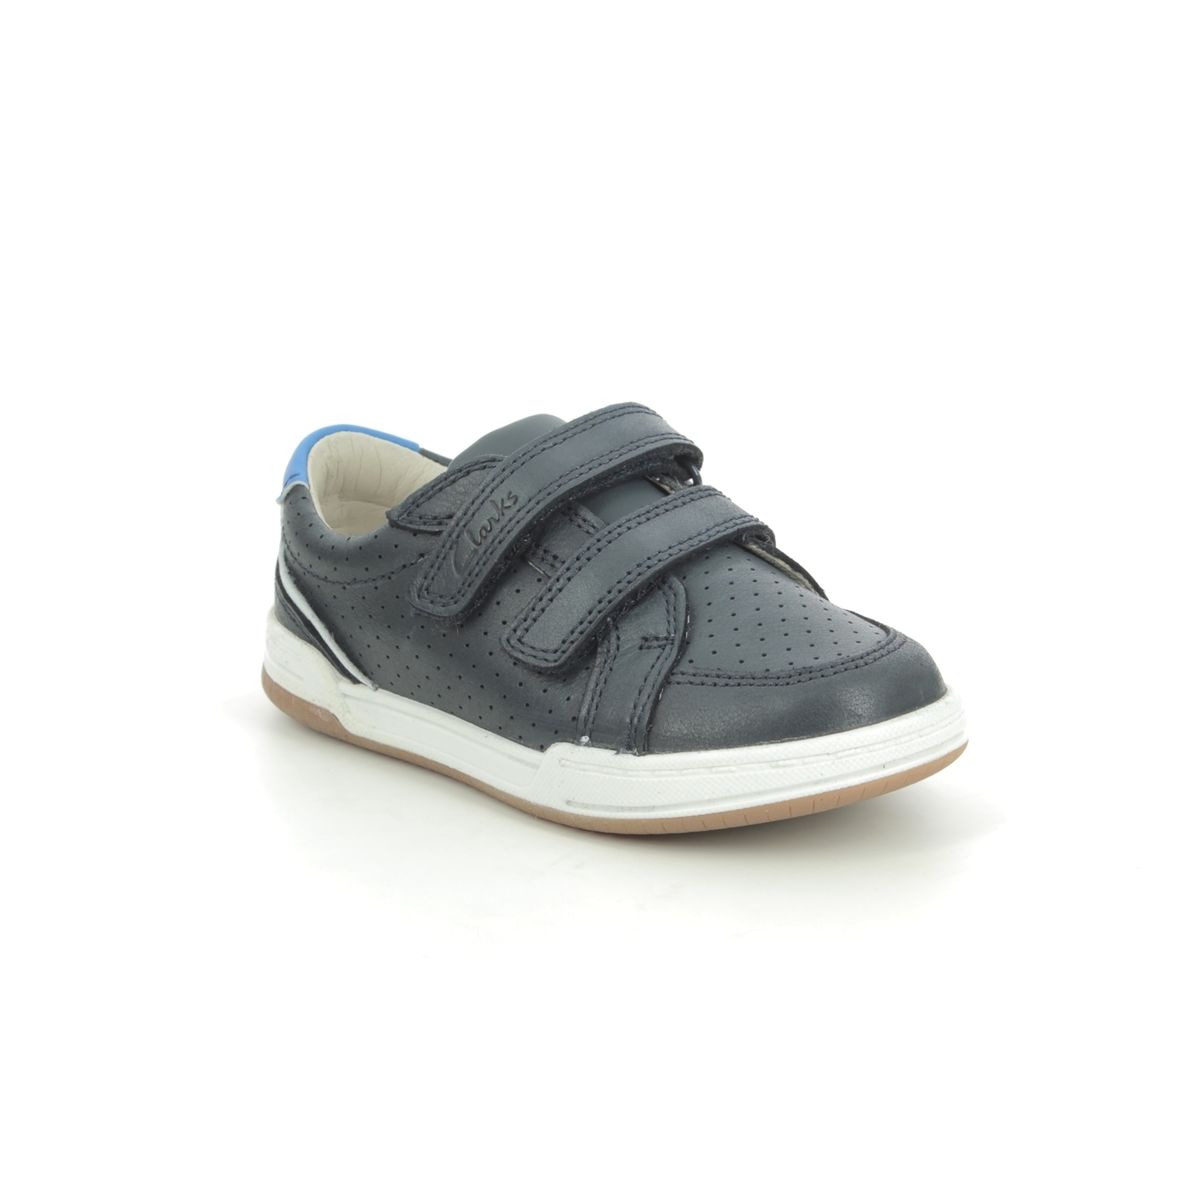 Clarks Fawn Solo T Navy Leather Kids Boys Toddler Shoes 5898-86F